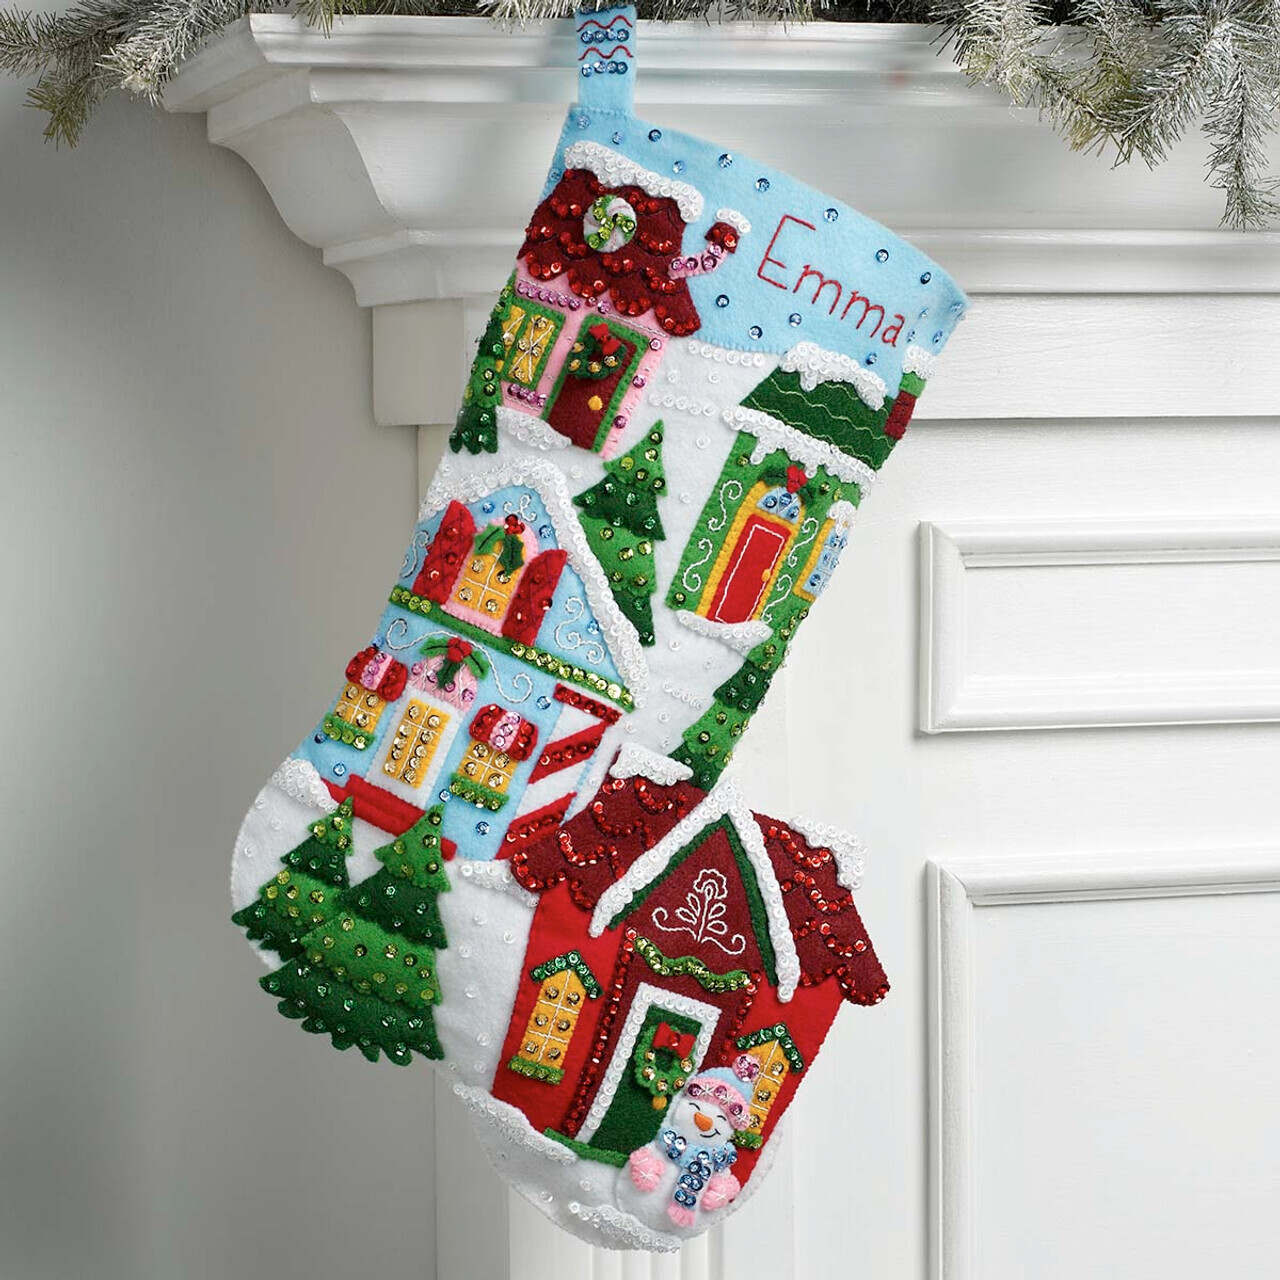 Bucilla Stocking kits for Christmas, Cross Stitch and Needle Crafts kits  are the best choice for your needle craft project.